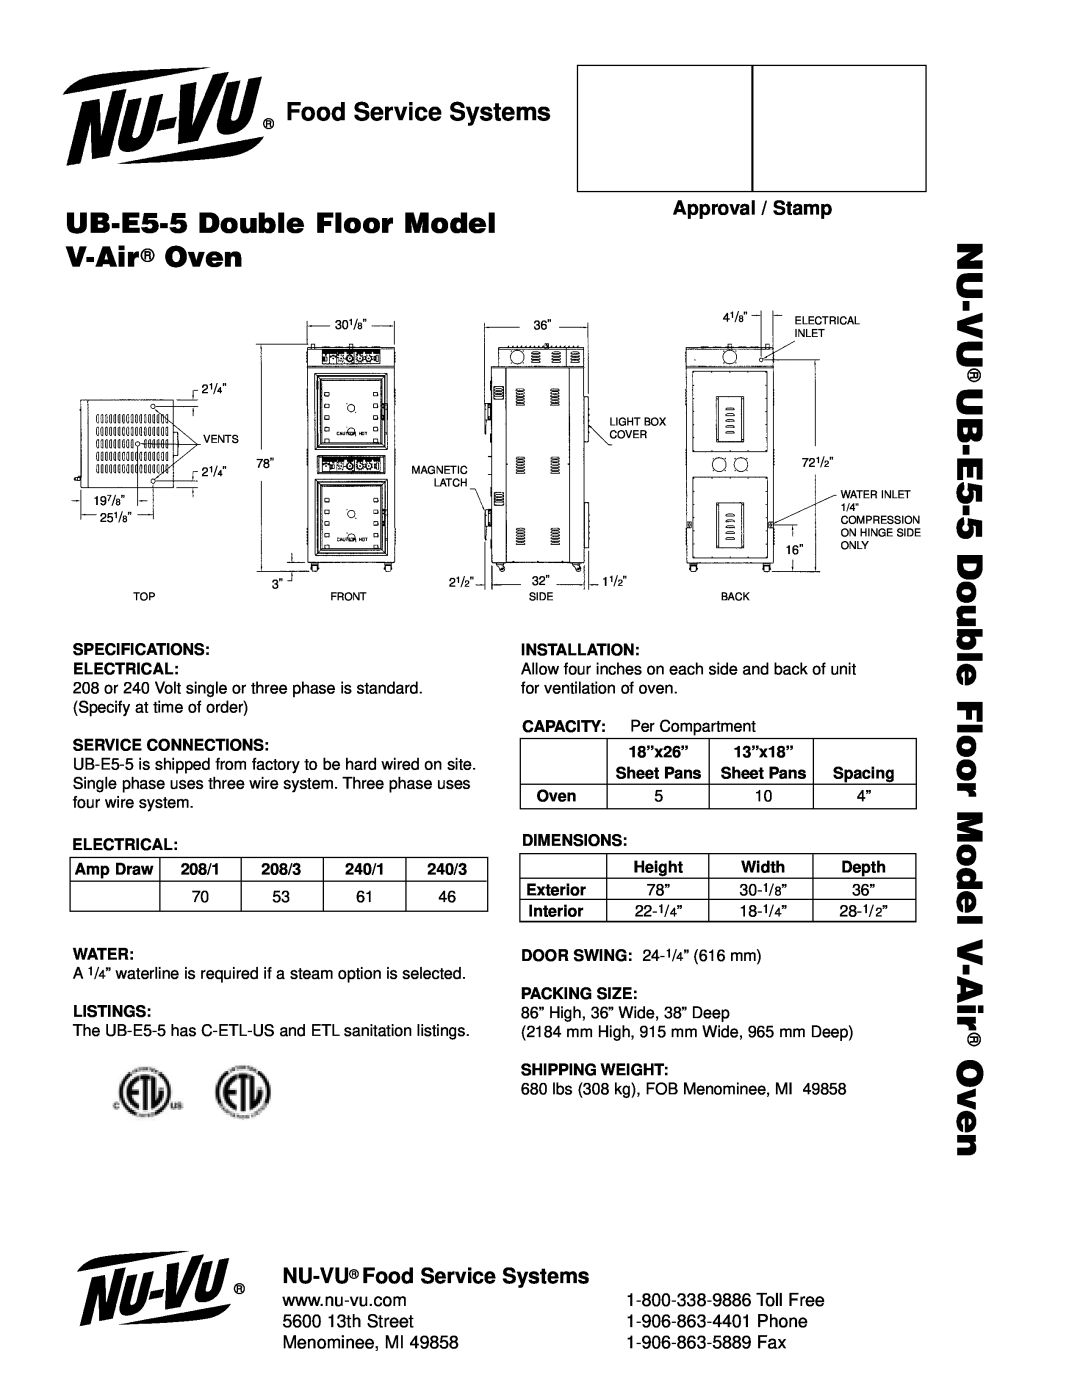 Middleby Cooking Systems Group VU UB-E5-5Double, UB-E5-5Double Floor Model V-Air Oven, Food Service Systems, Phone 